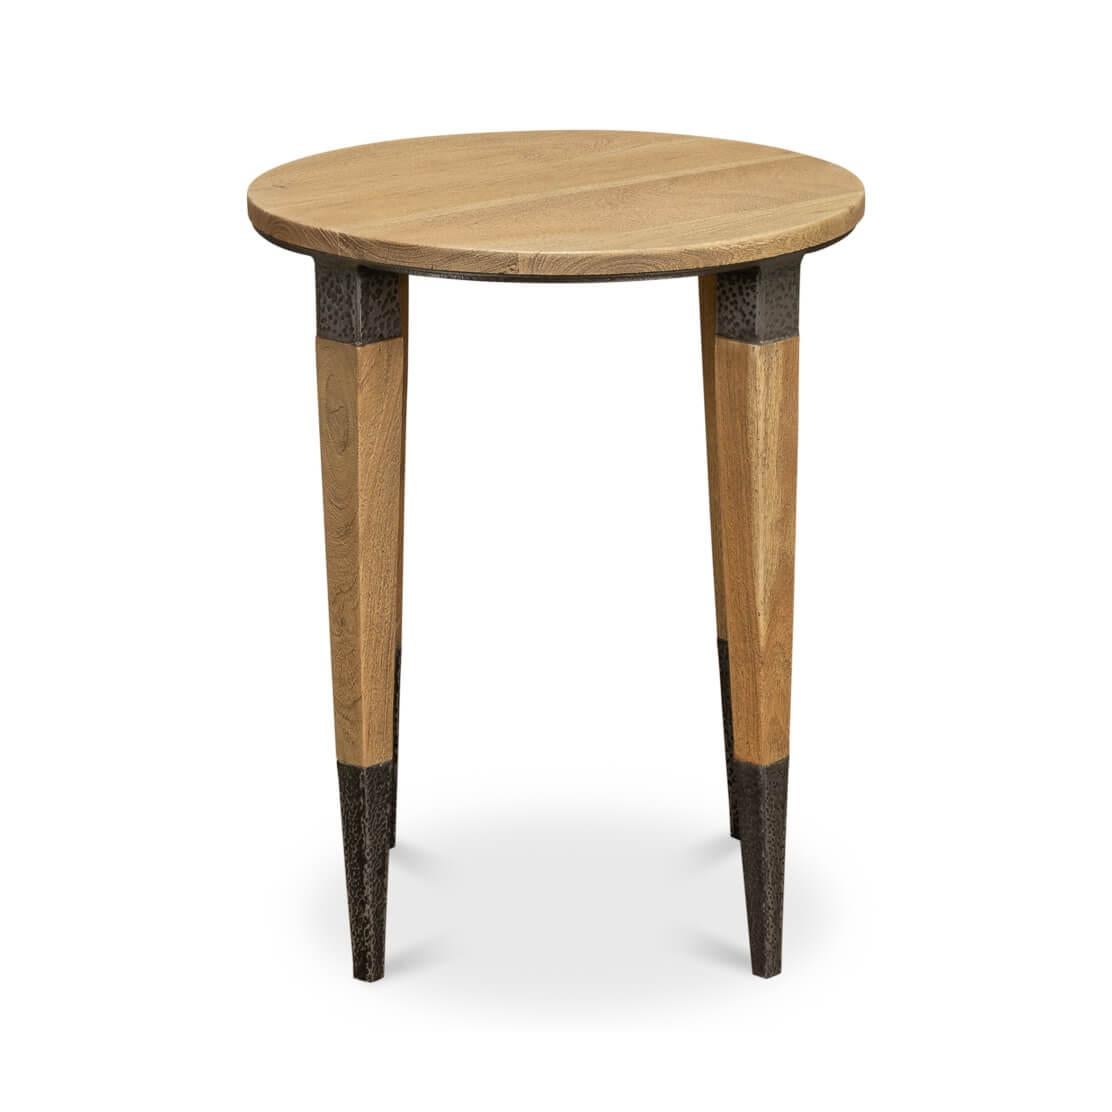 This unique piece boasts a circular top crafted from natural wood in our wheat finish, showcasing the beauty of its grain and warm tones.

What truly sets this table apart are the distinctive legs. Each one tapers down in an elegant taper, finished